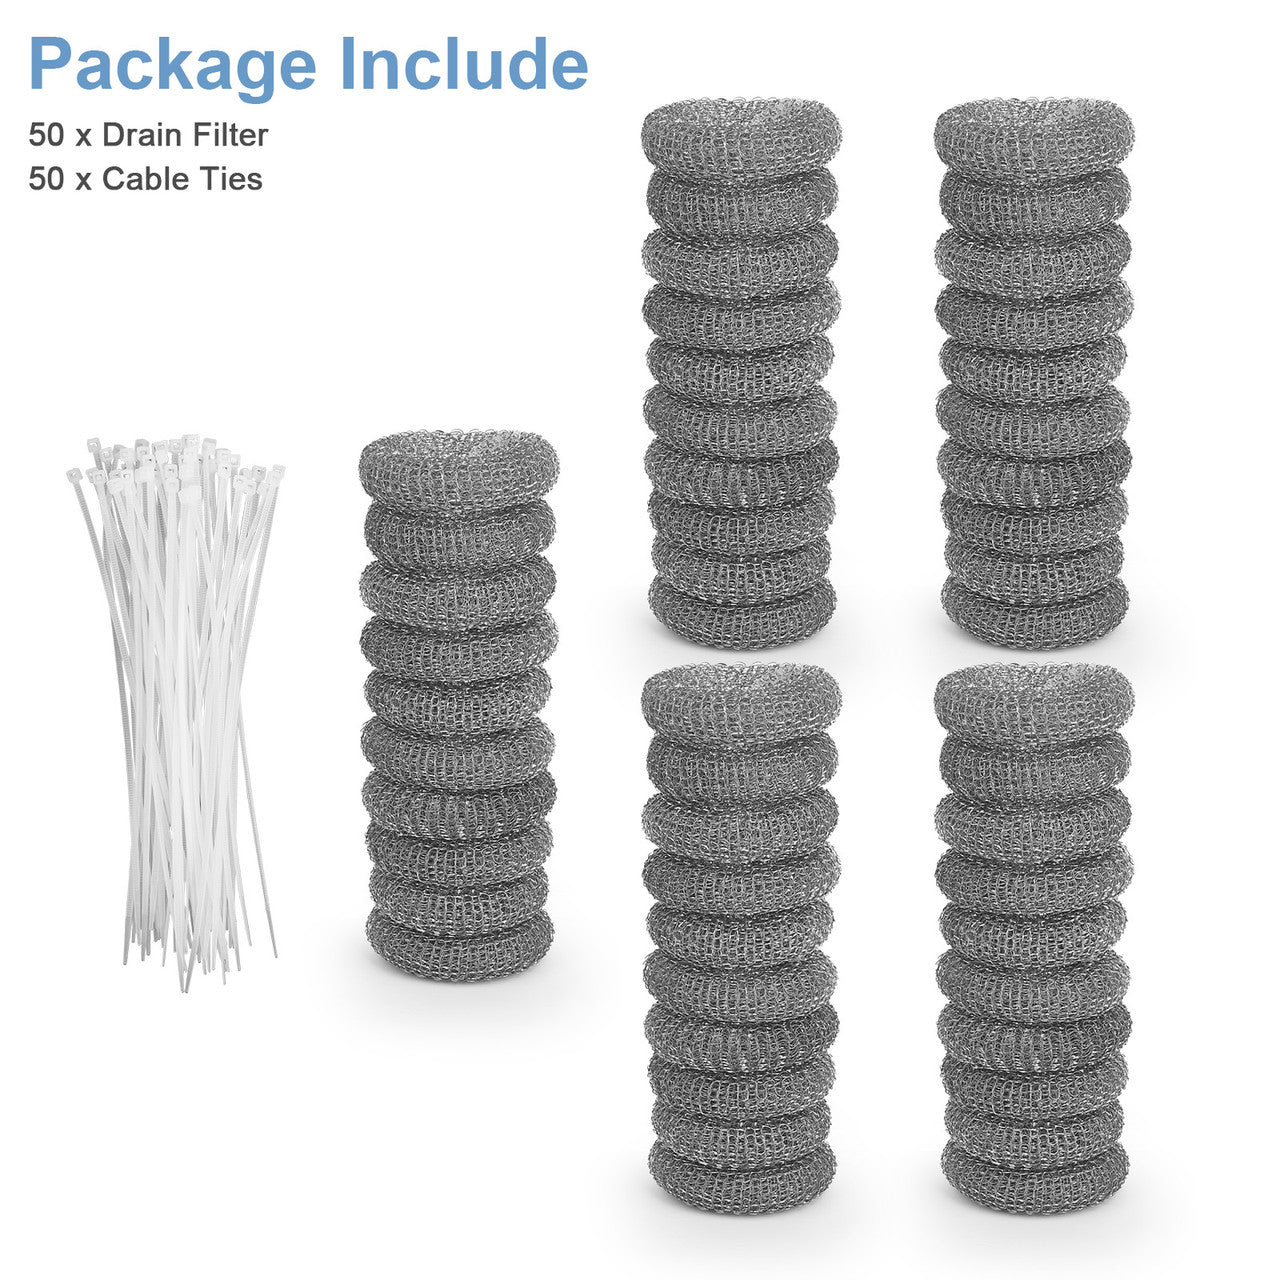 50 PCS Lint Traps Washing Machine Lint Trap Stainless Steel lint Snare Traps Laundry Mesh Washer Hose Filter - Washing Machine Lint Snare;  Lint Traps Hose Screen Filter Catcher with 50 Nylon Cable Ties